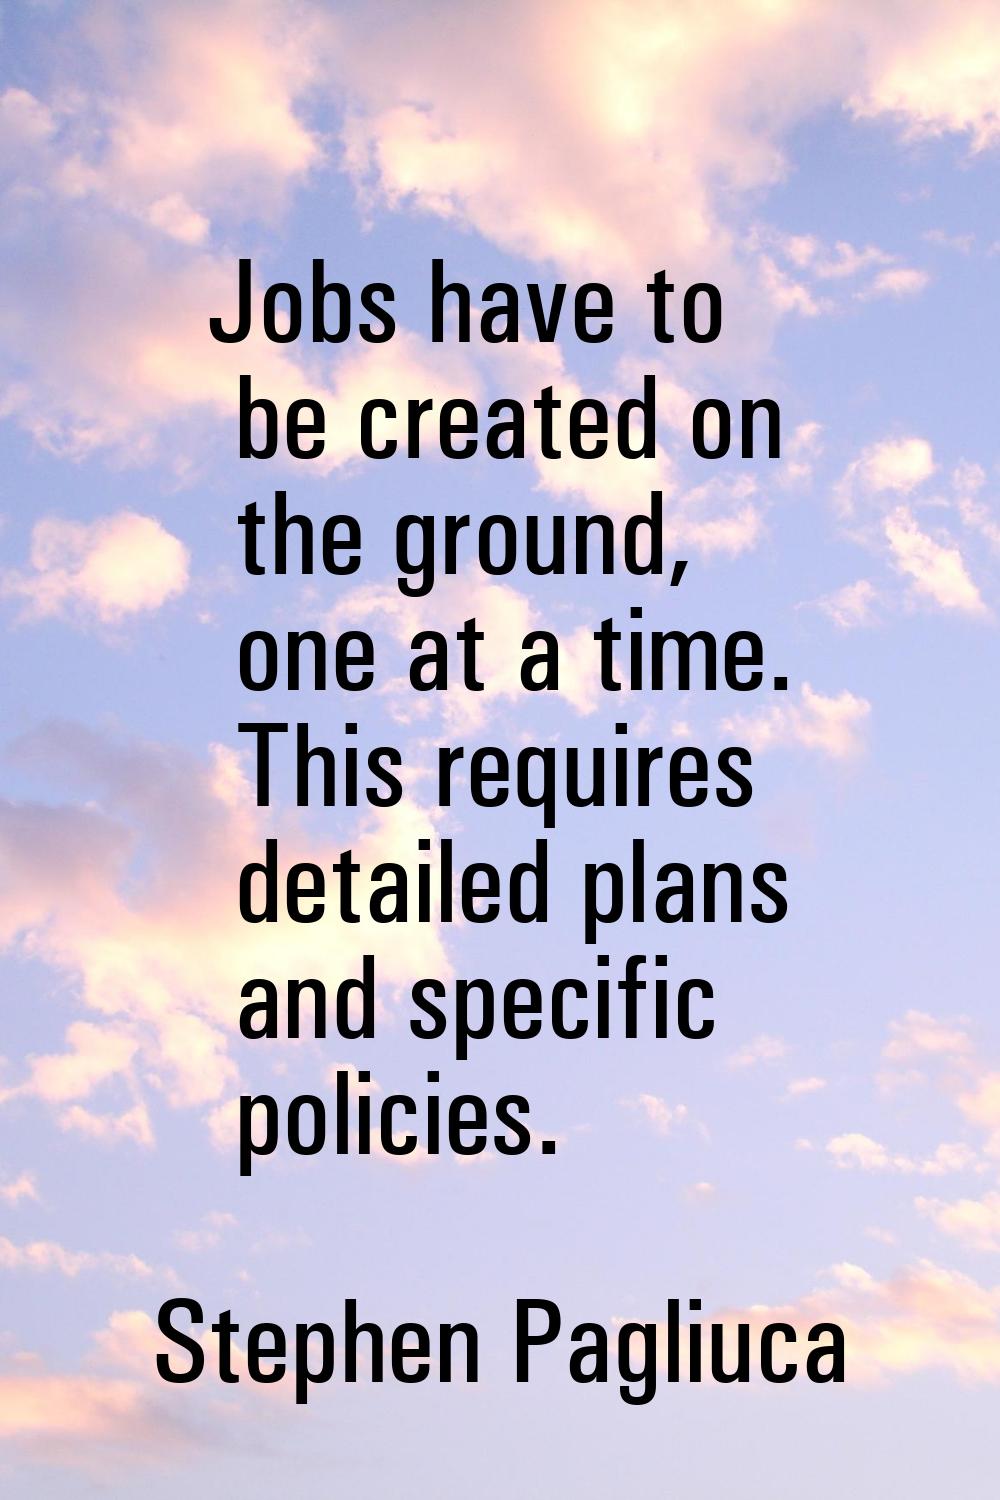 Jobs have to be created on the ground, one at a time. This requires detailed plans and specific pol